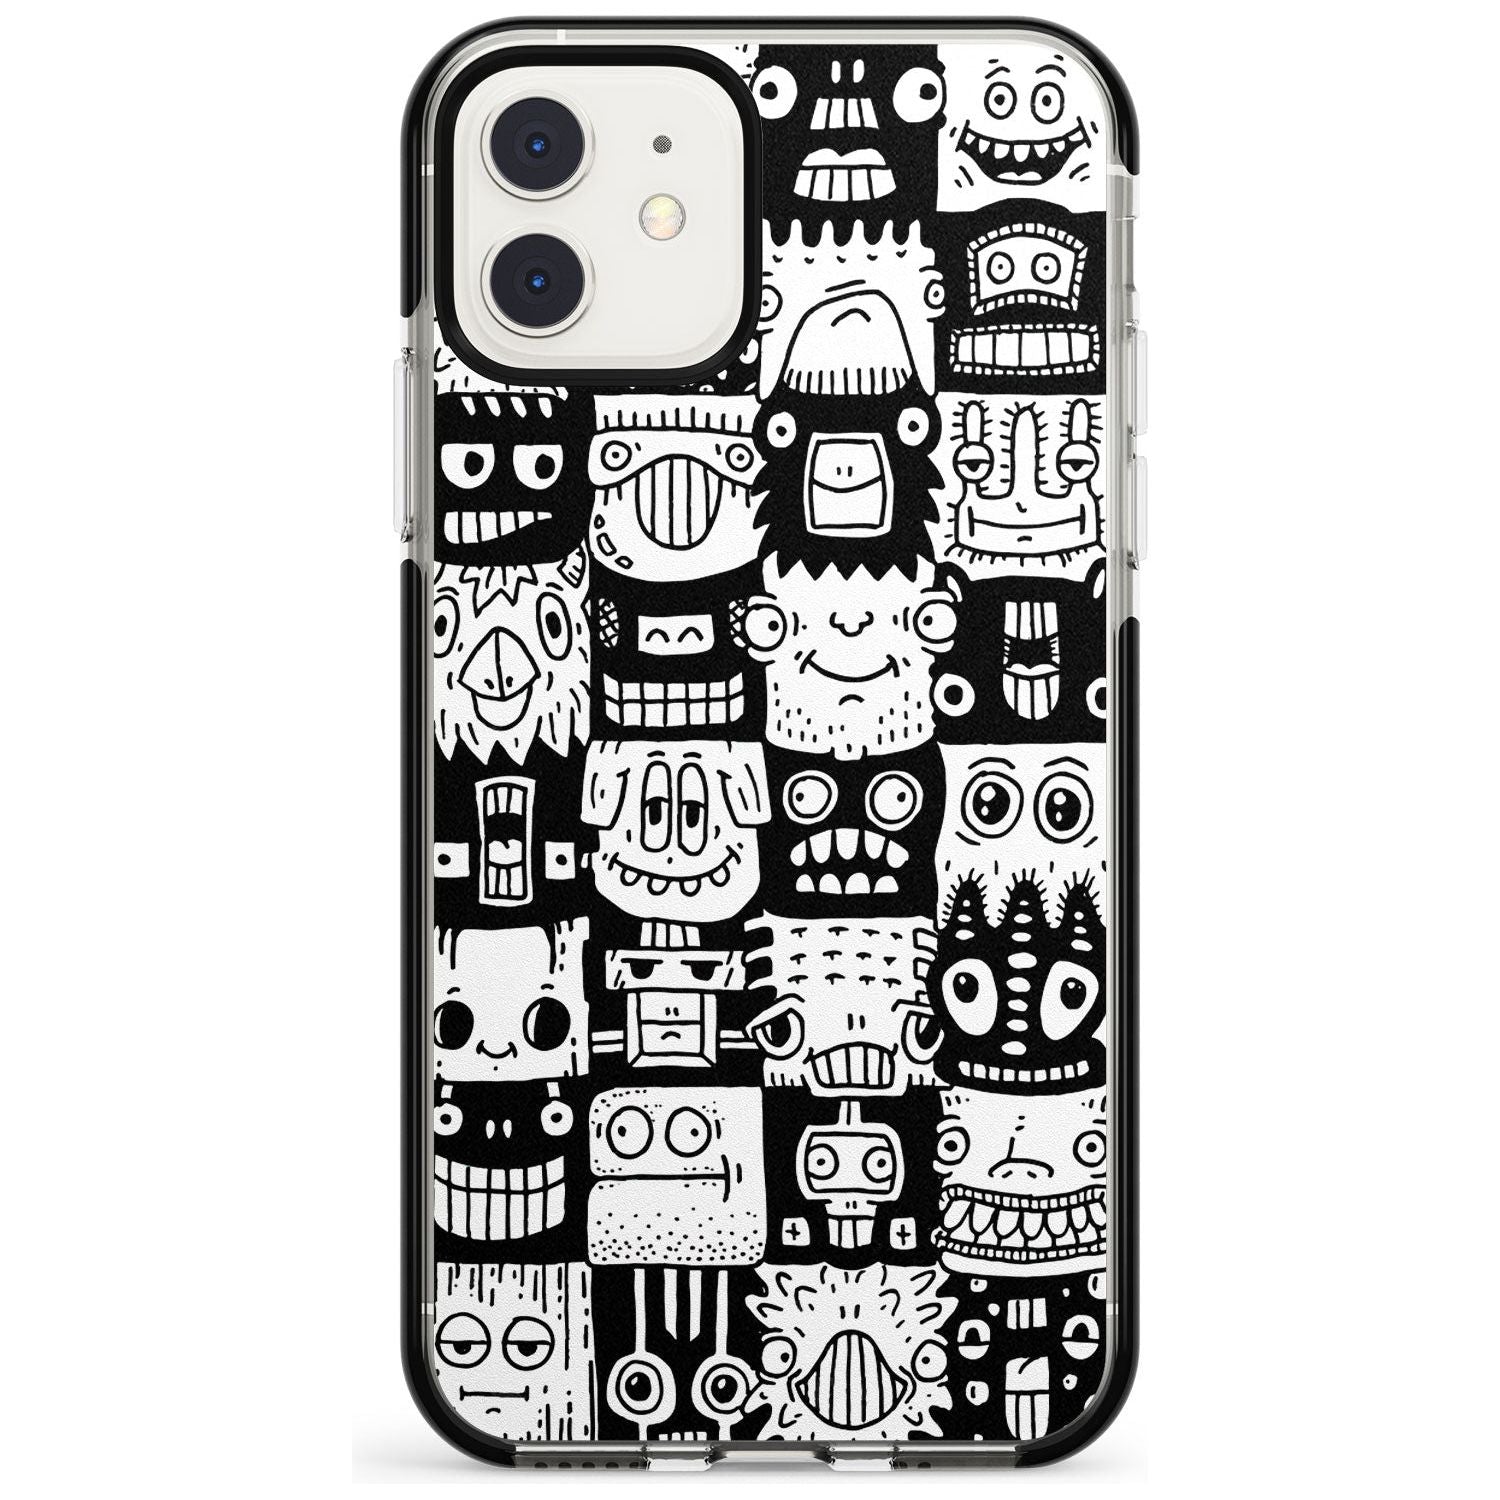 Checkerboard Heads Black Impact Phone Case for iPhone 11 Pro Max